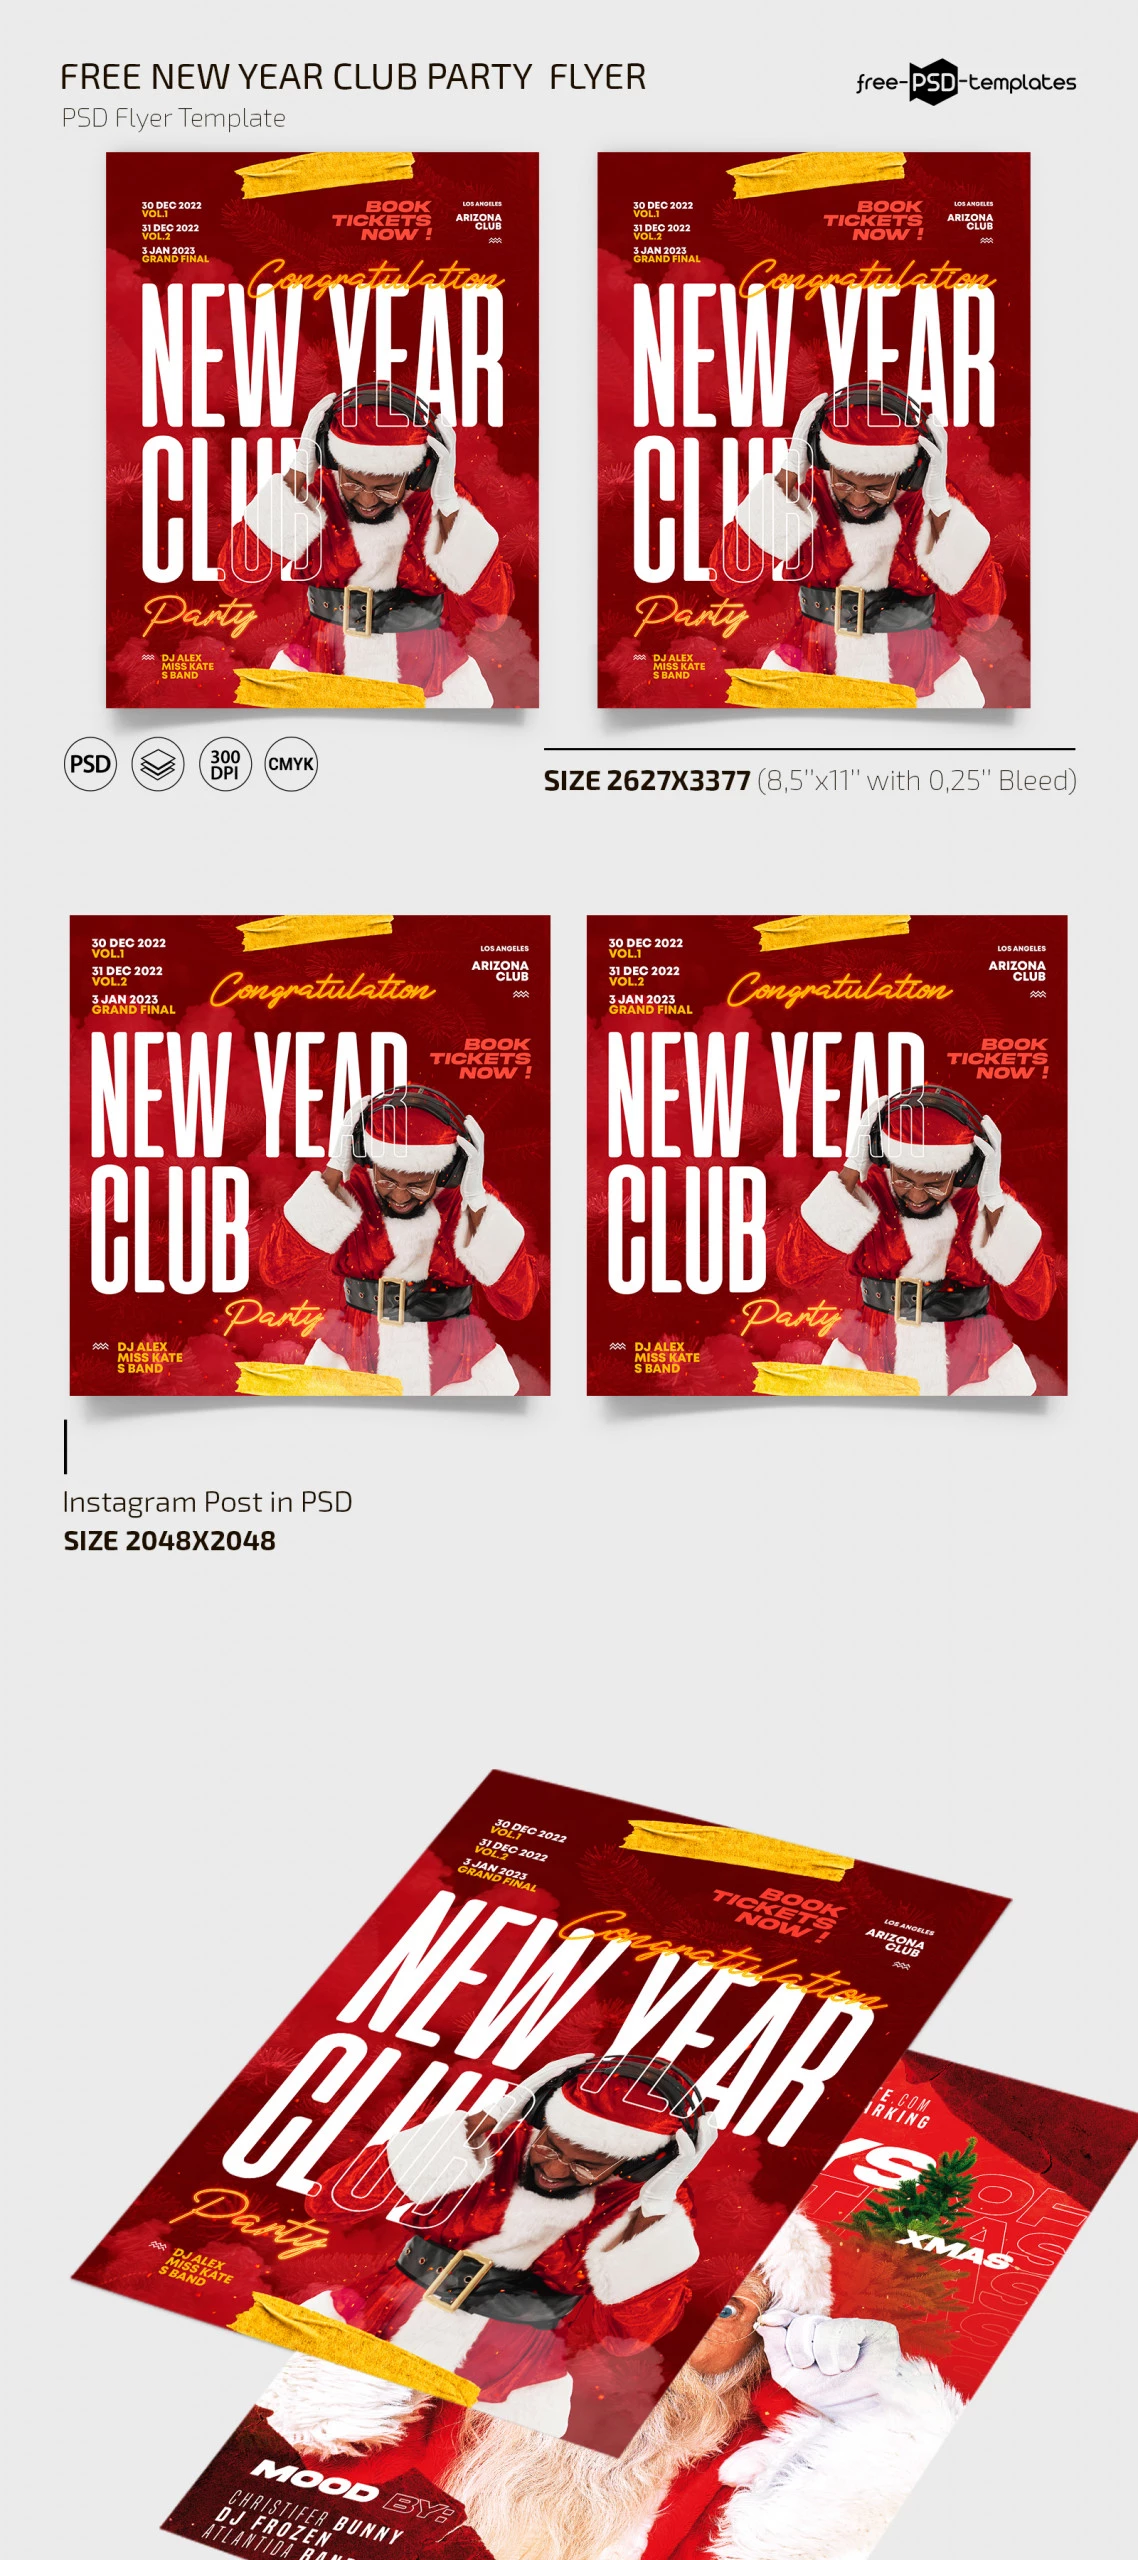 Free New Year Club Party Flyer Template + Instagram Post (PSD)